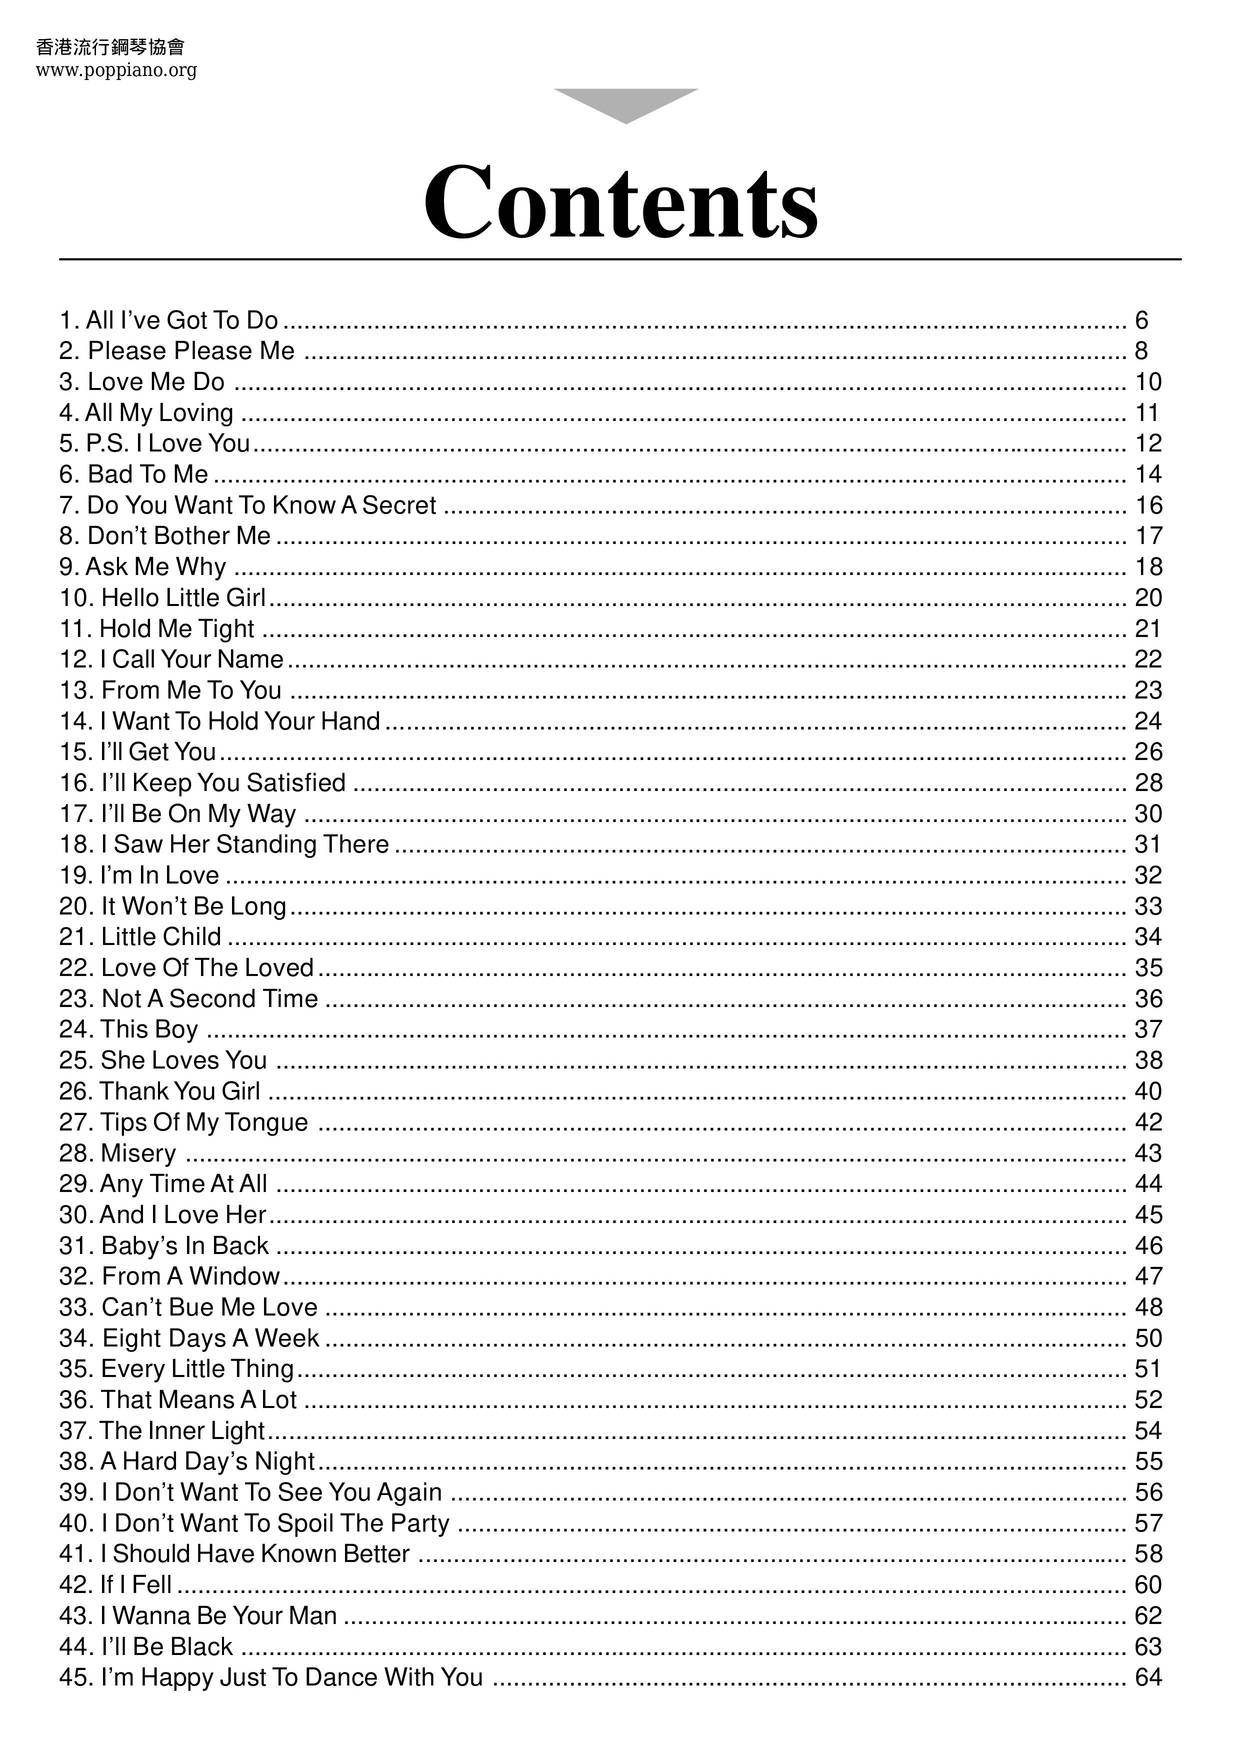 The Beatles - All Songs 288 Pages Score